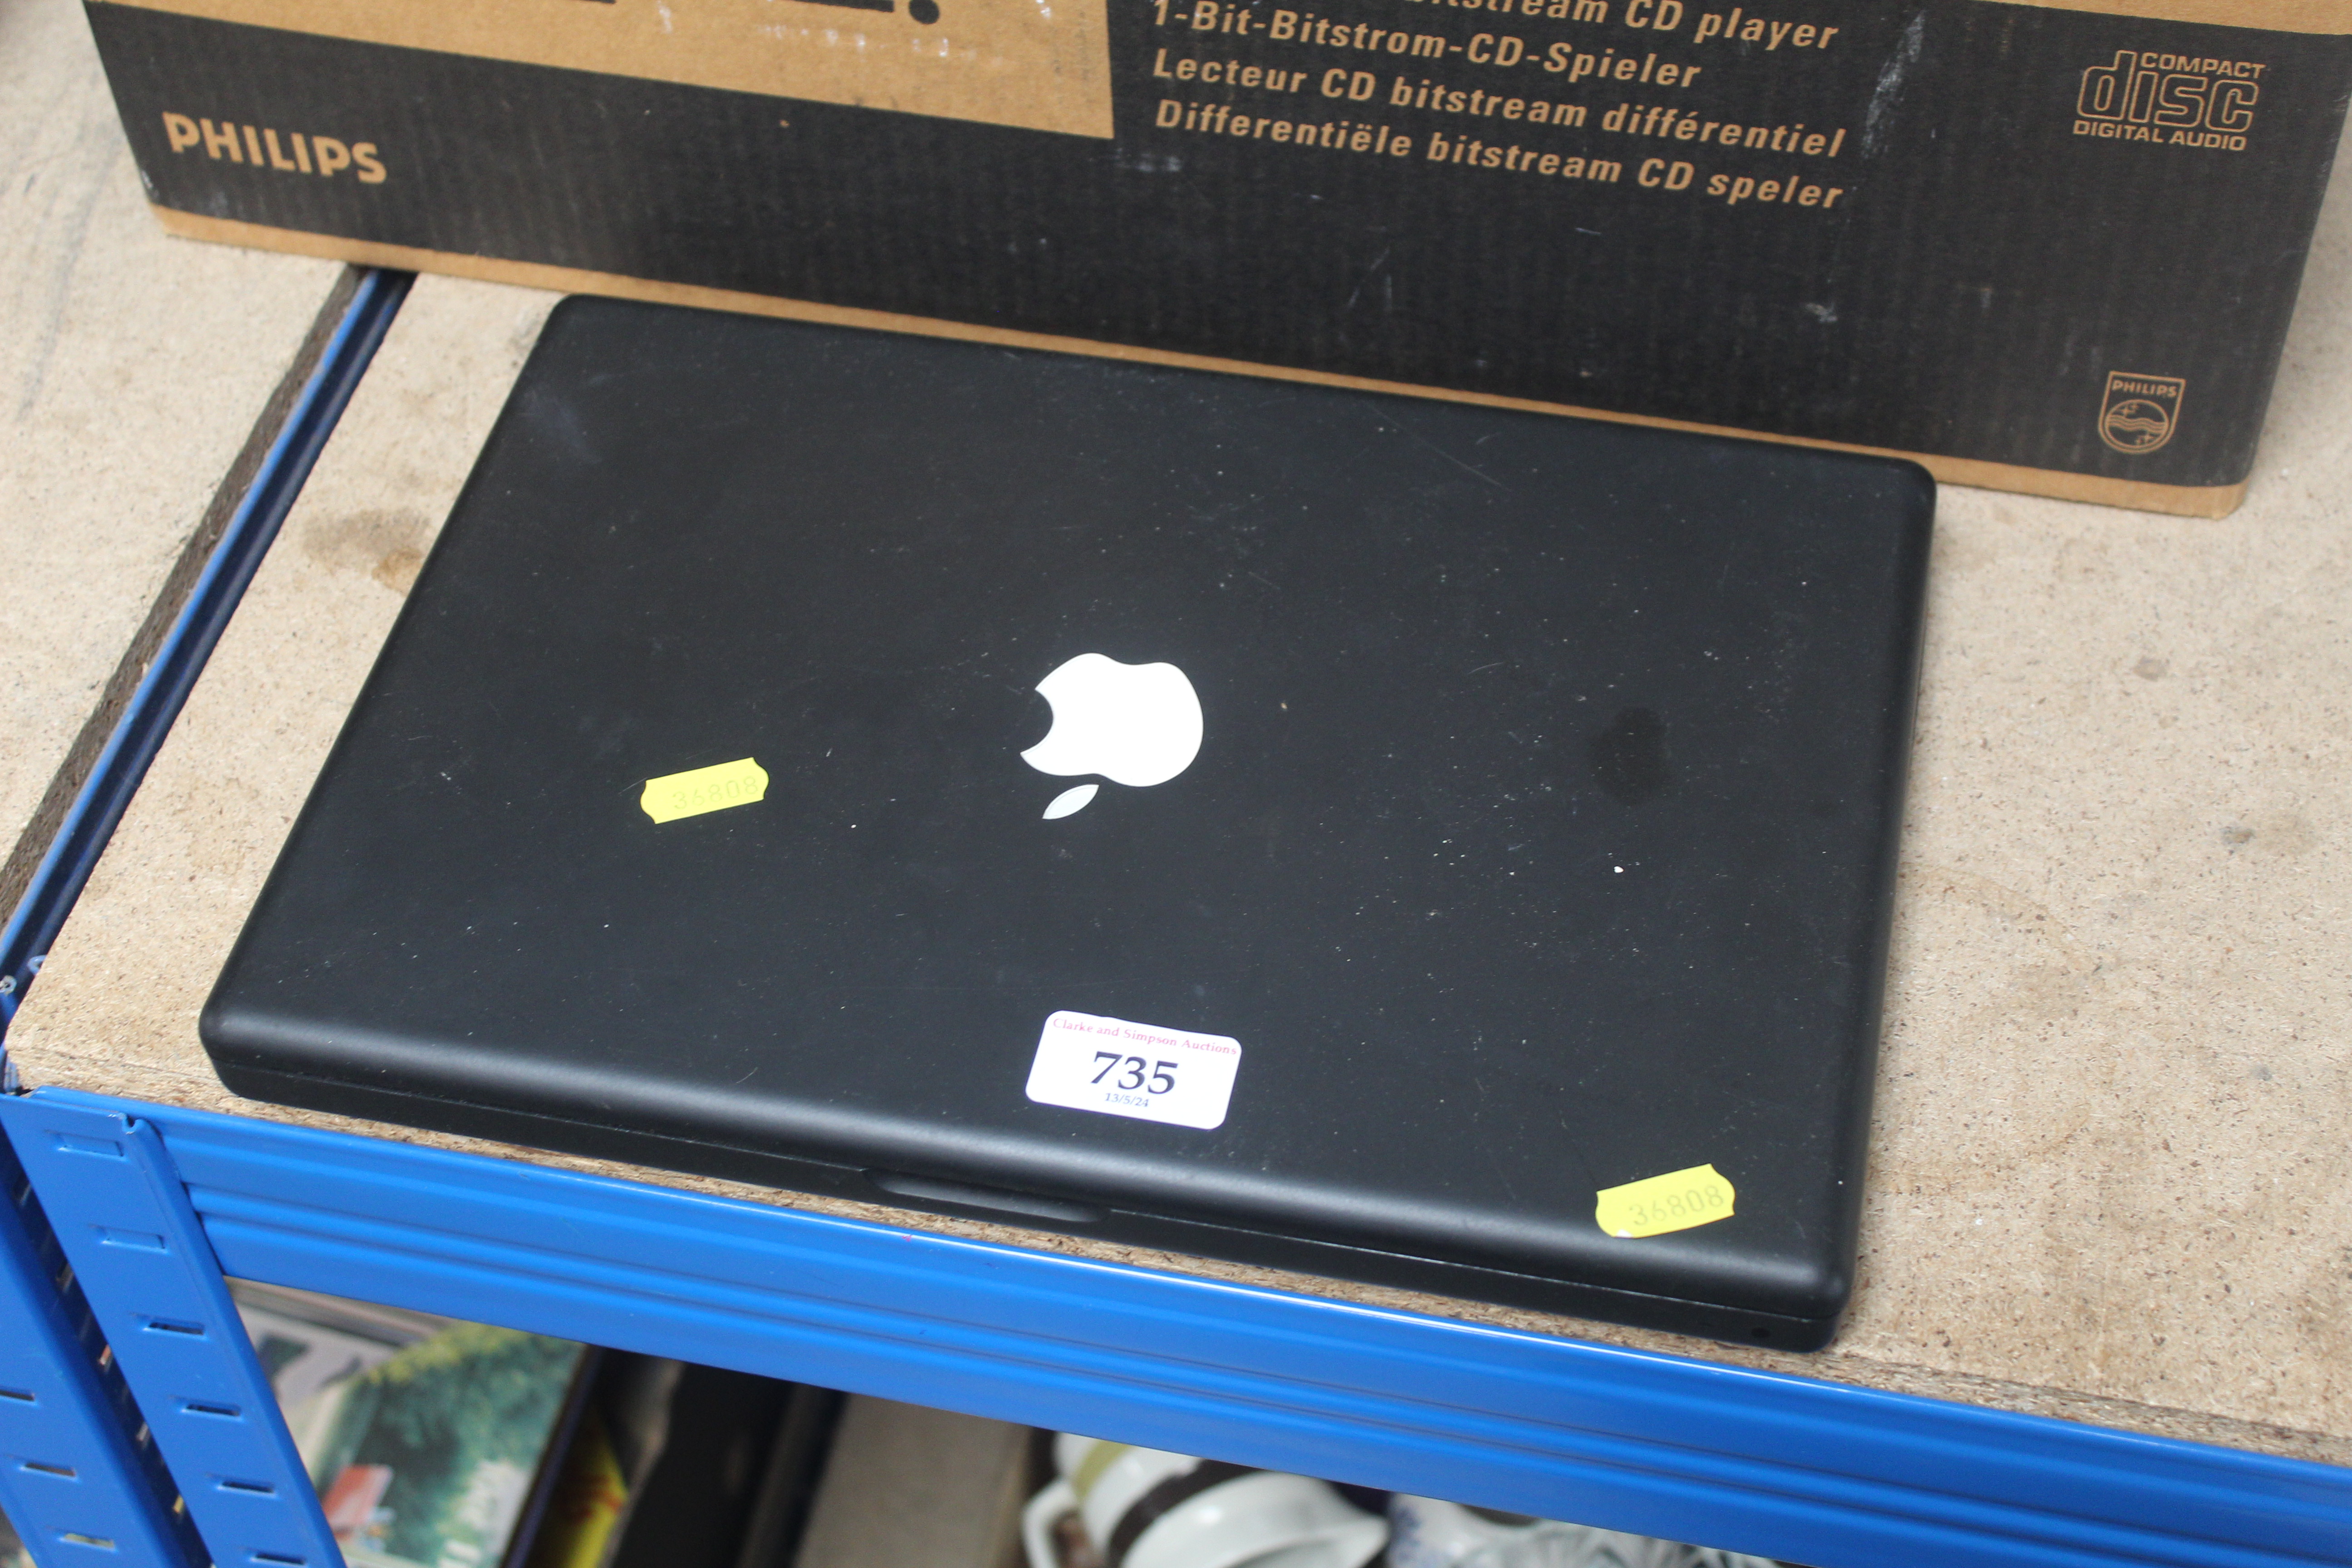 An Apple Mac Book lacking cables